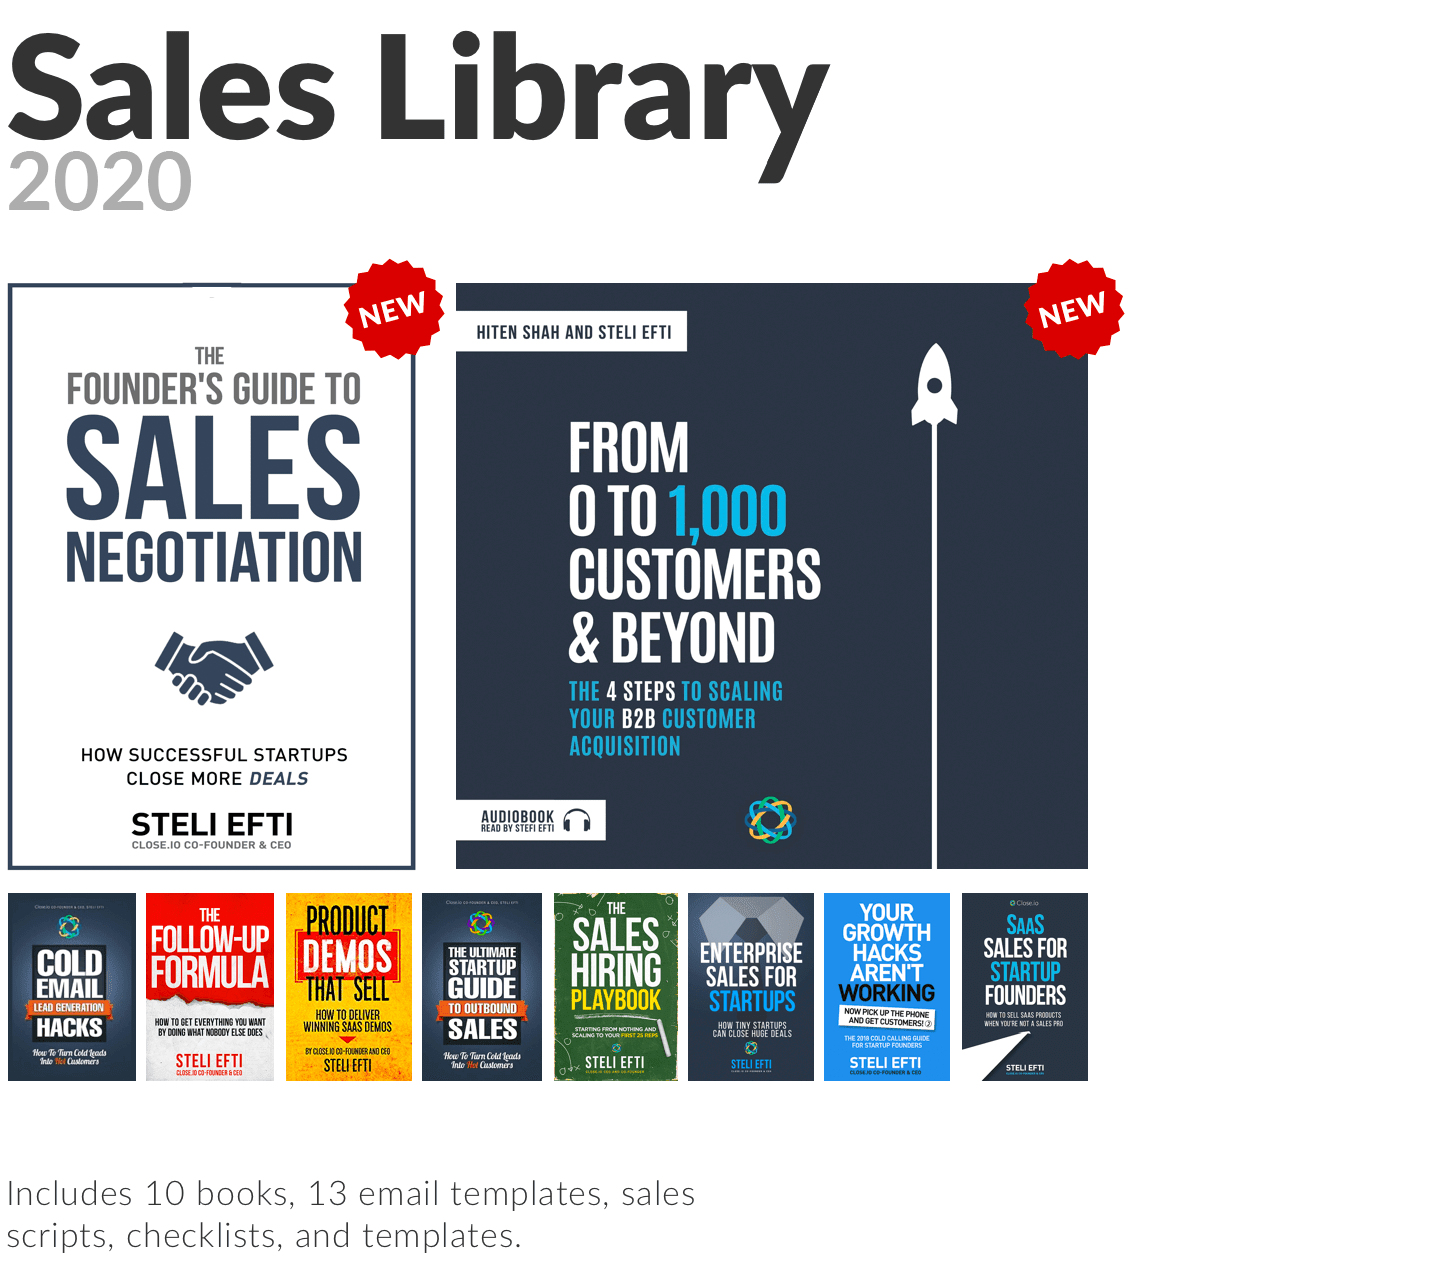 Sales-Library 2020